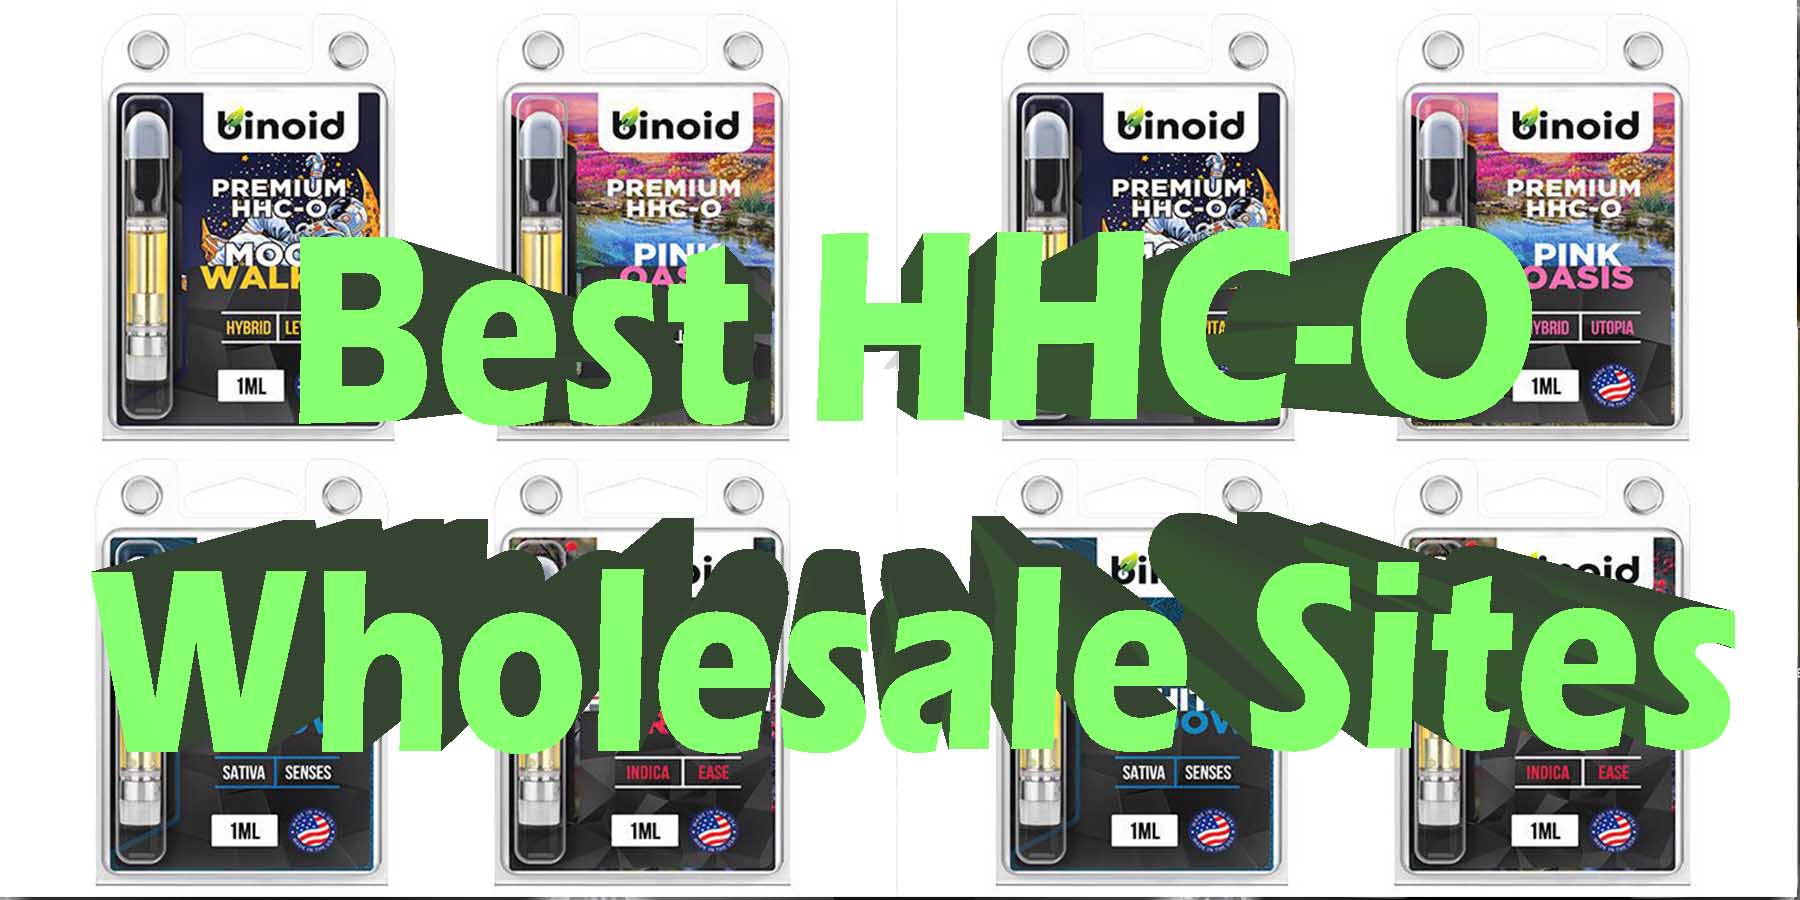 Best HHC-O Wholesale Sites HowToGetNearMe BestPlace LowestPrice Coupon Discount For Smoking Best High Smoke Shop Online Near Me StrongestBrand Binoid.